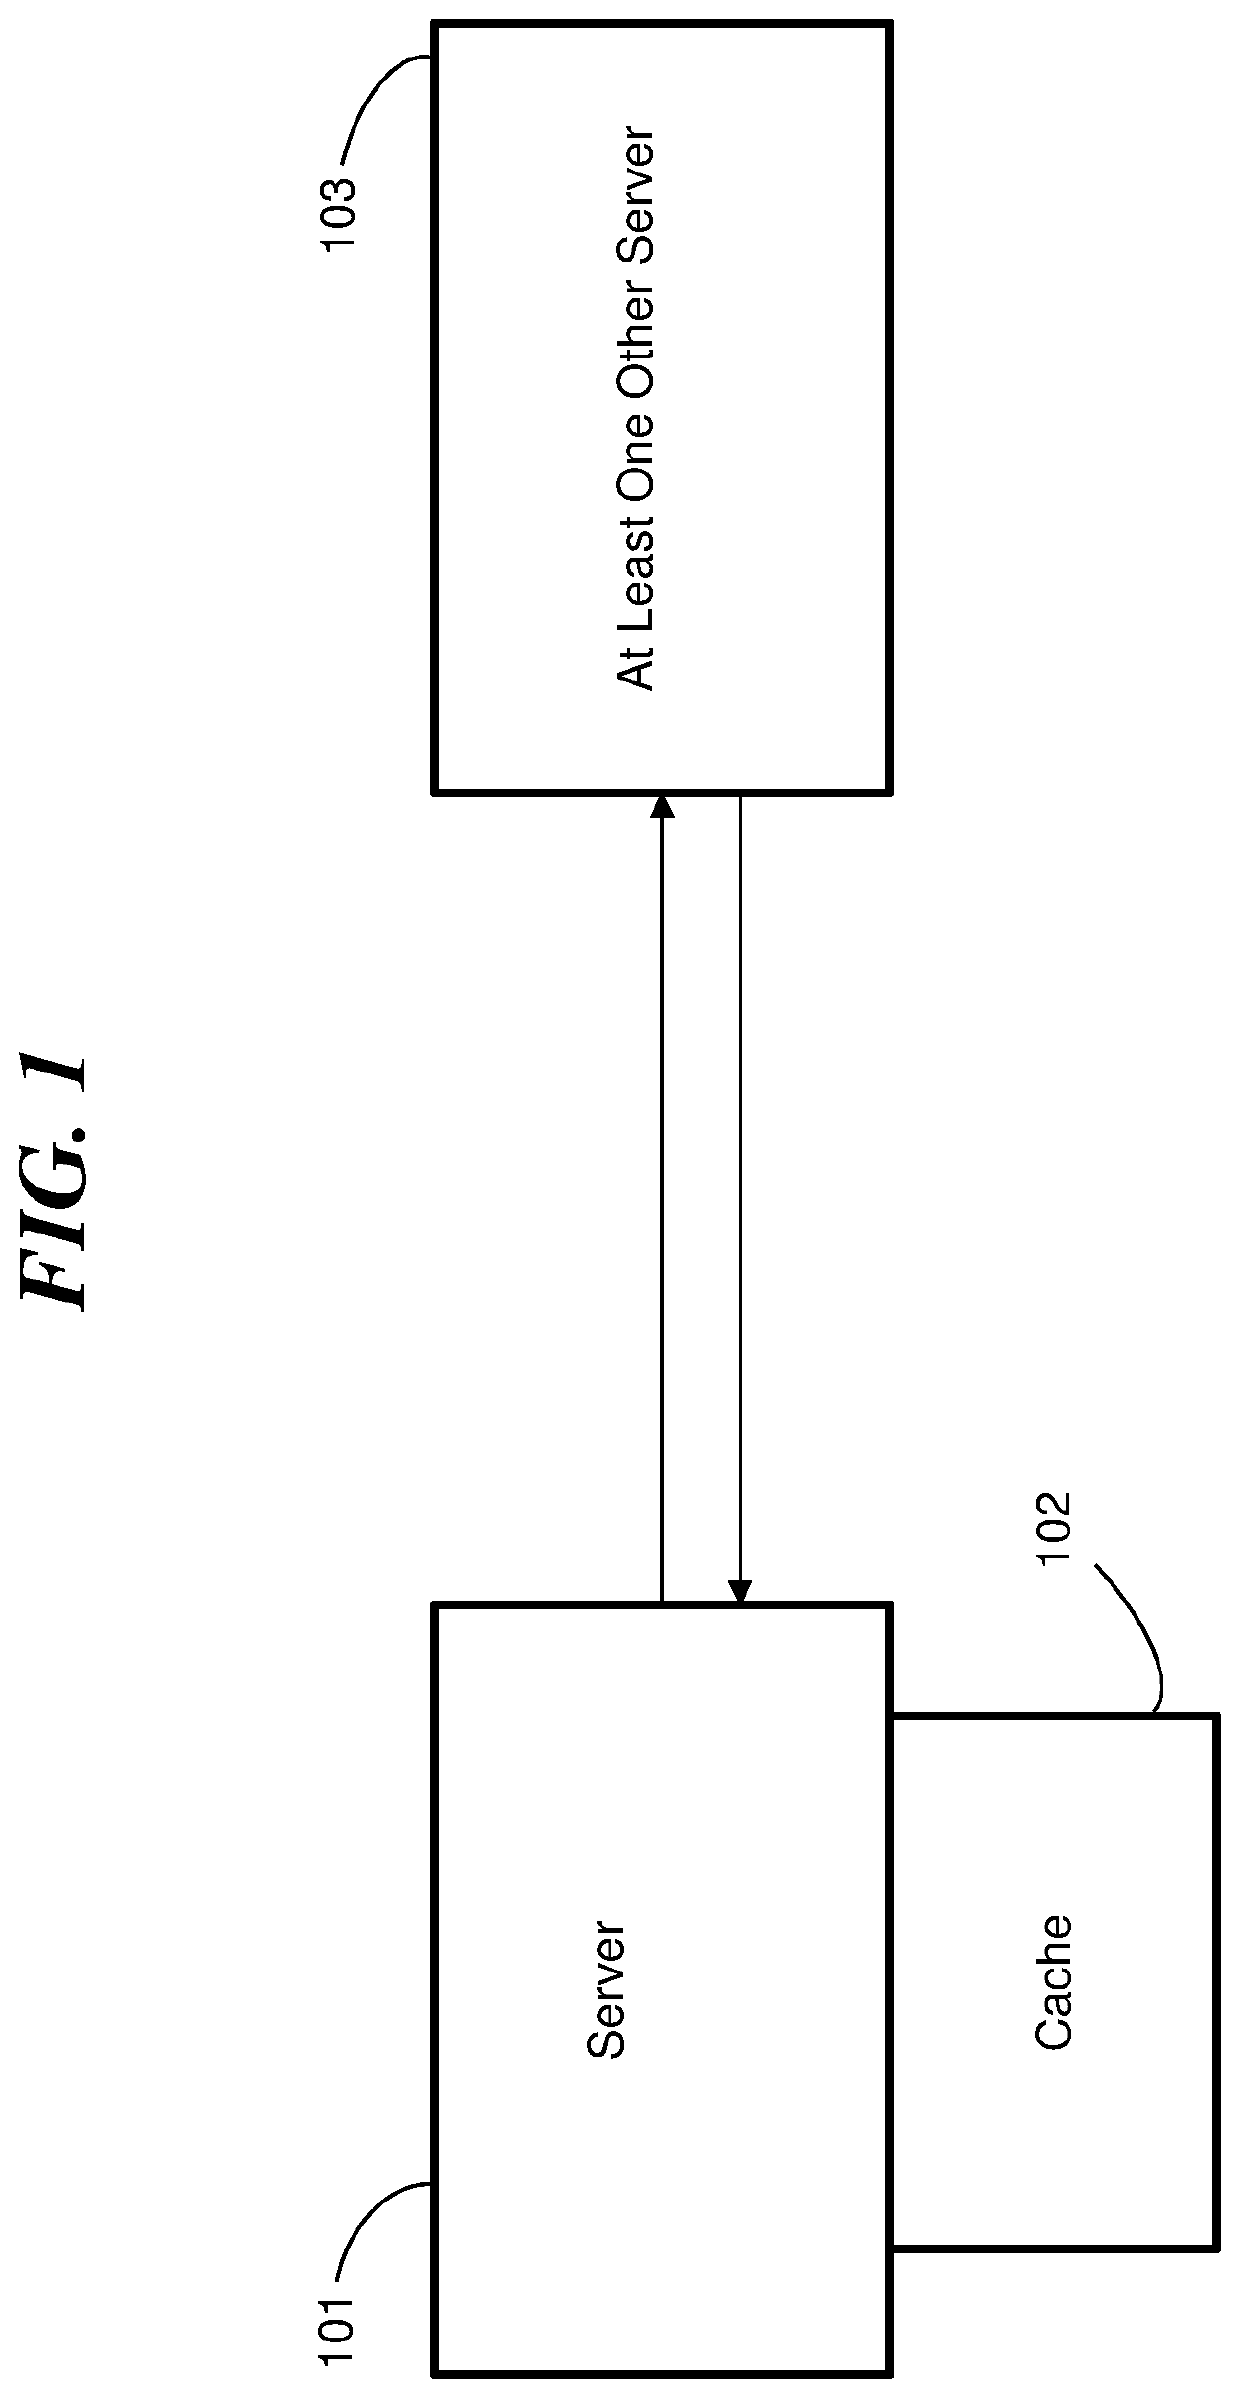 Asynchronous data store operations including selectively returning a value from cache or a value determined by an asynchronous computation